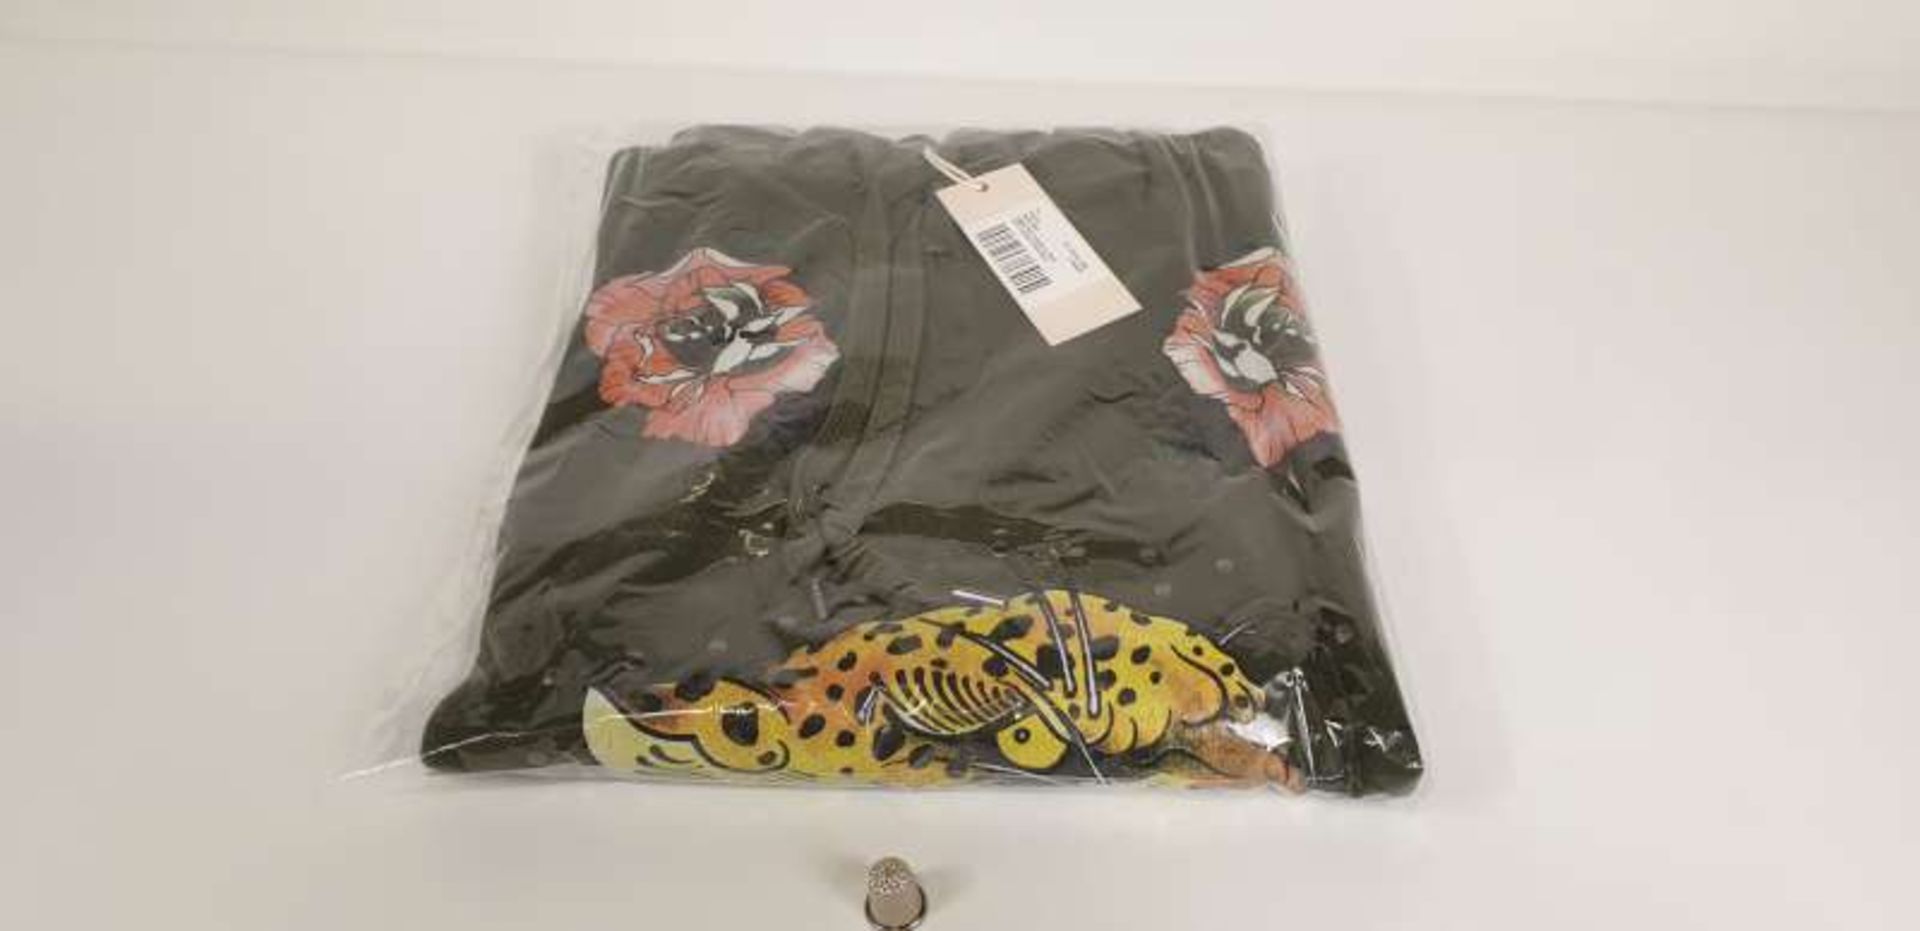 9 X BRAND NEW ILLEGAL CLUB PARIS HOODED TOPS WITH TIGER DETAIL SIZE LARGE